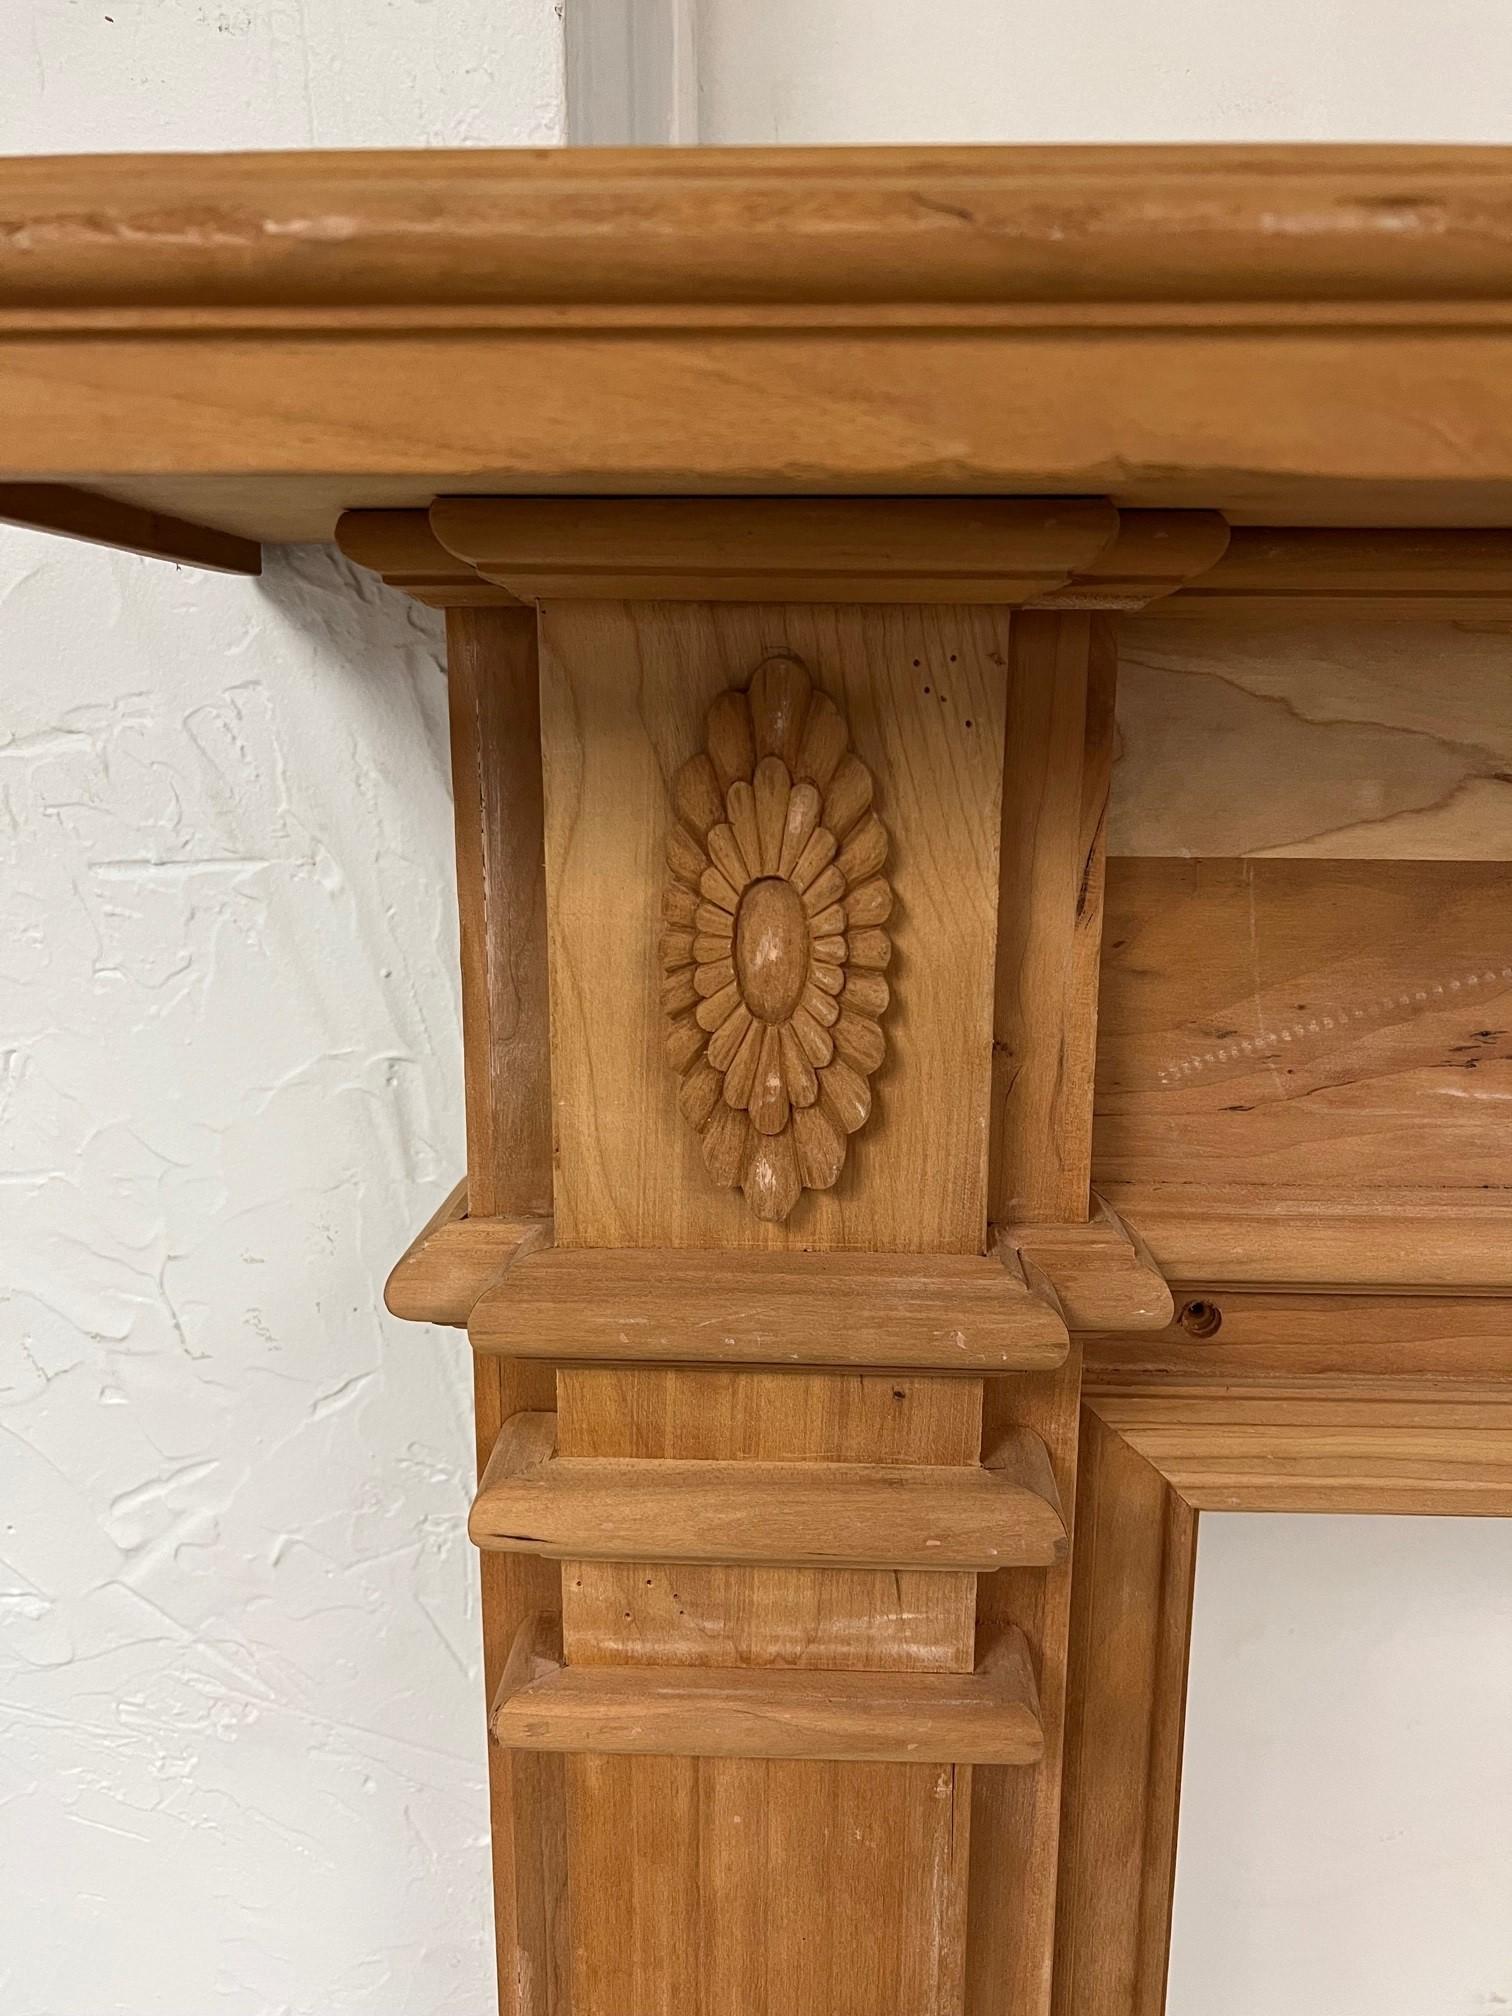 Carved Wood Fireplace Mantle Cherry with Fluted Legs Decorative Center In Good Condition For Sale In Stamford, CT